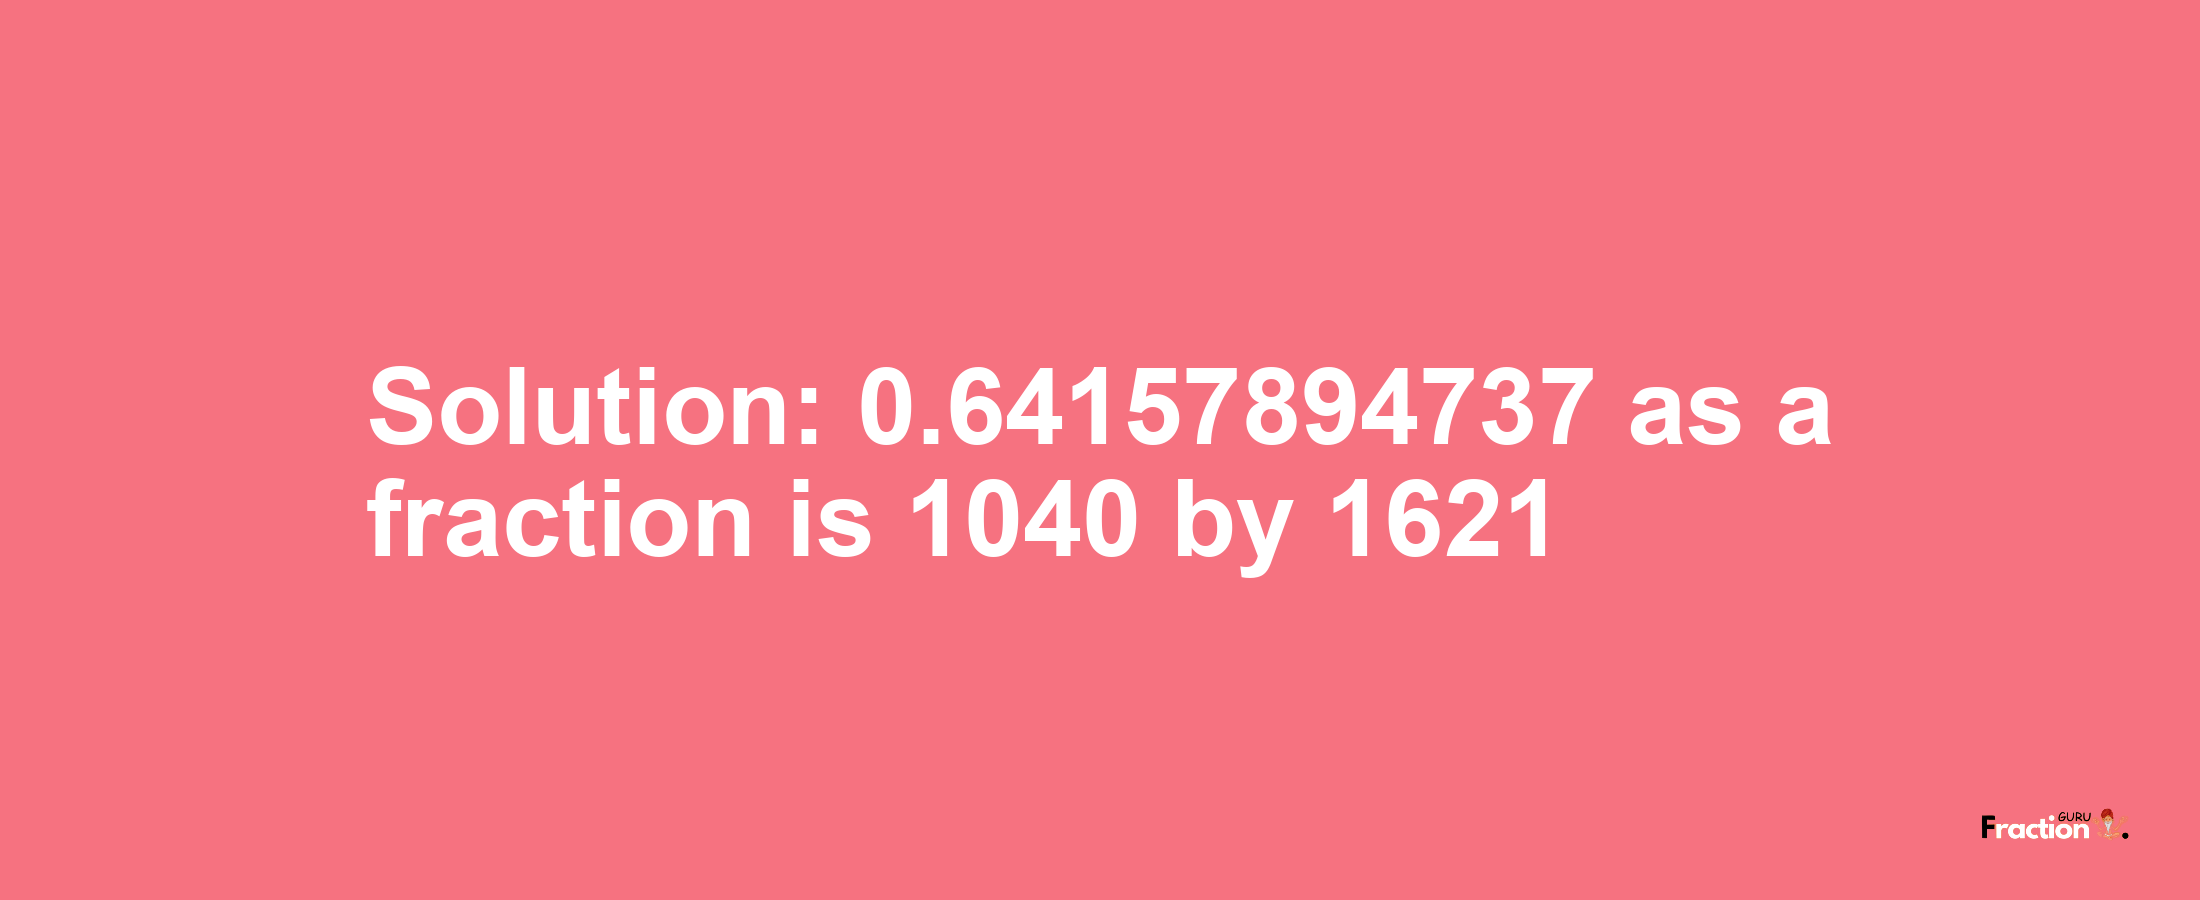 Solution:0.64157894737 as a fraction is 1040/1621